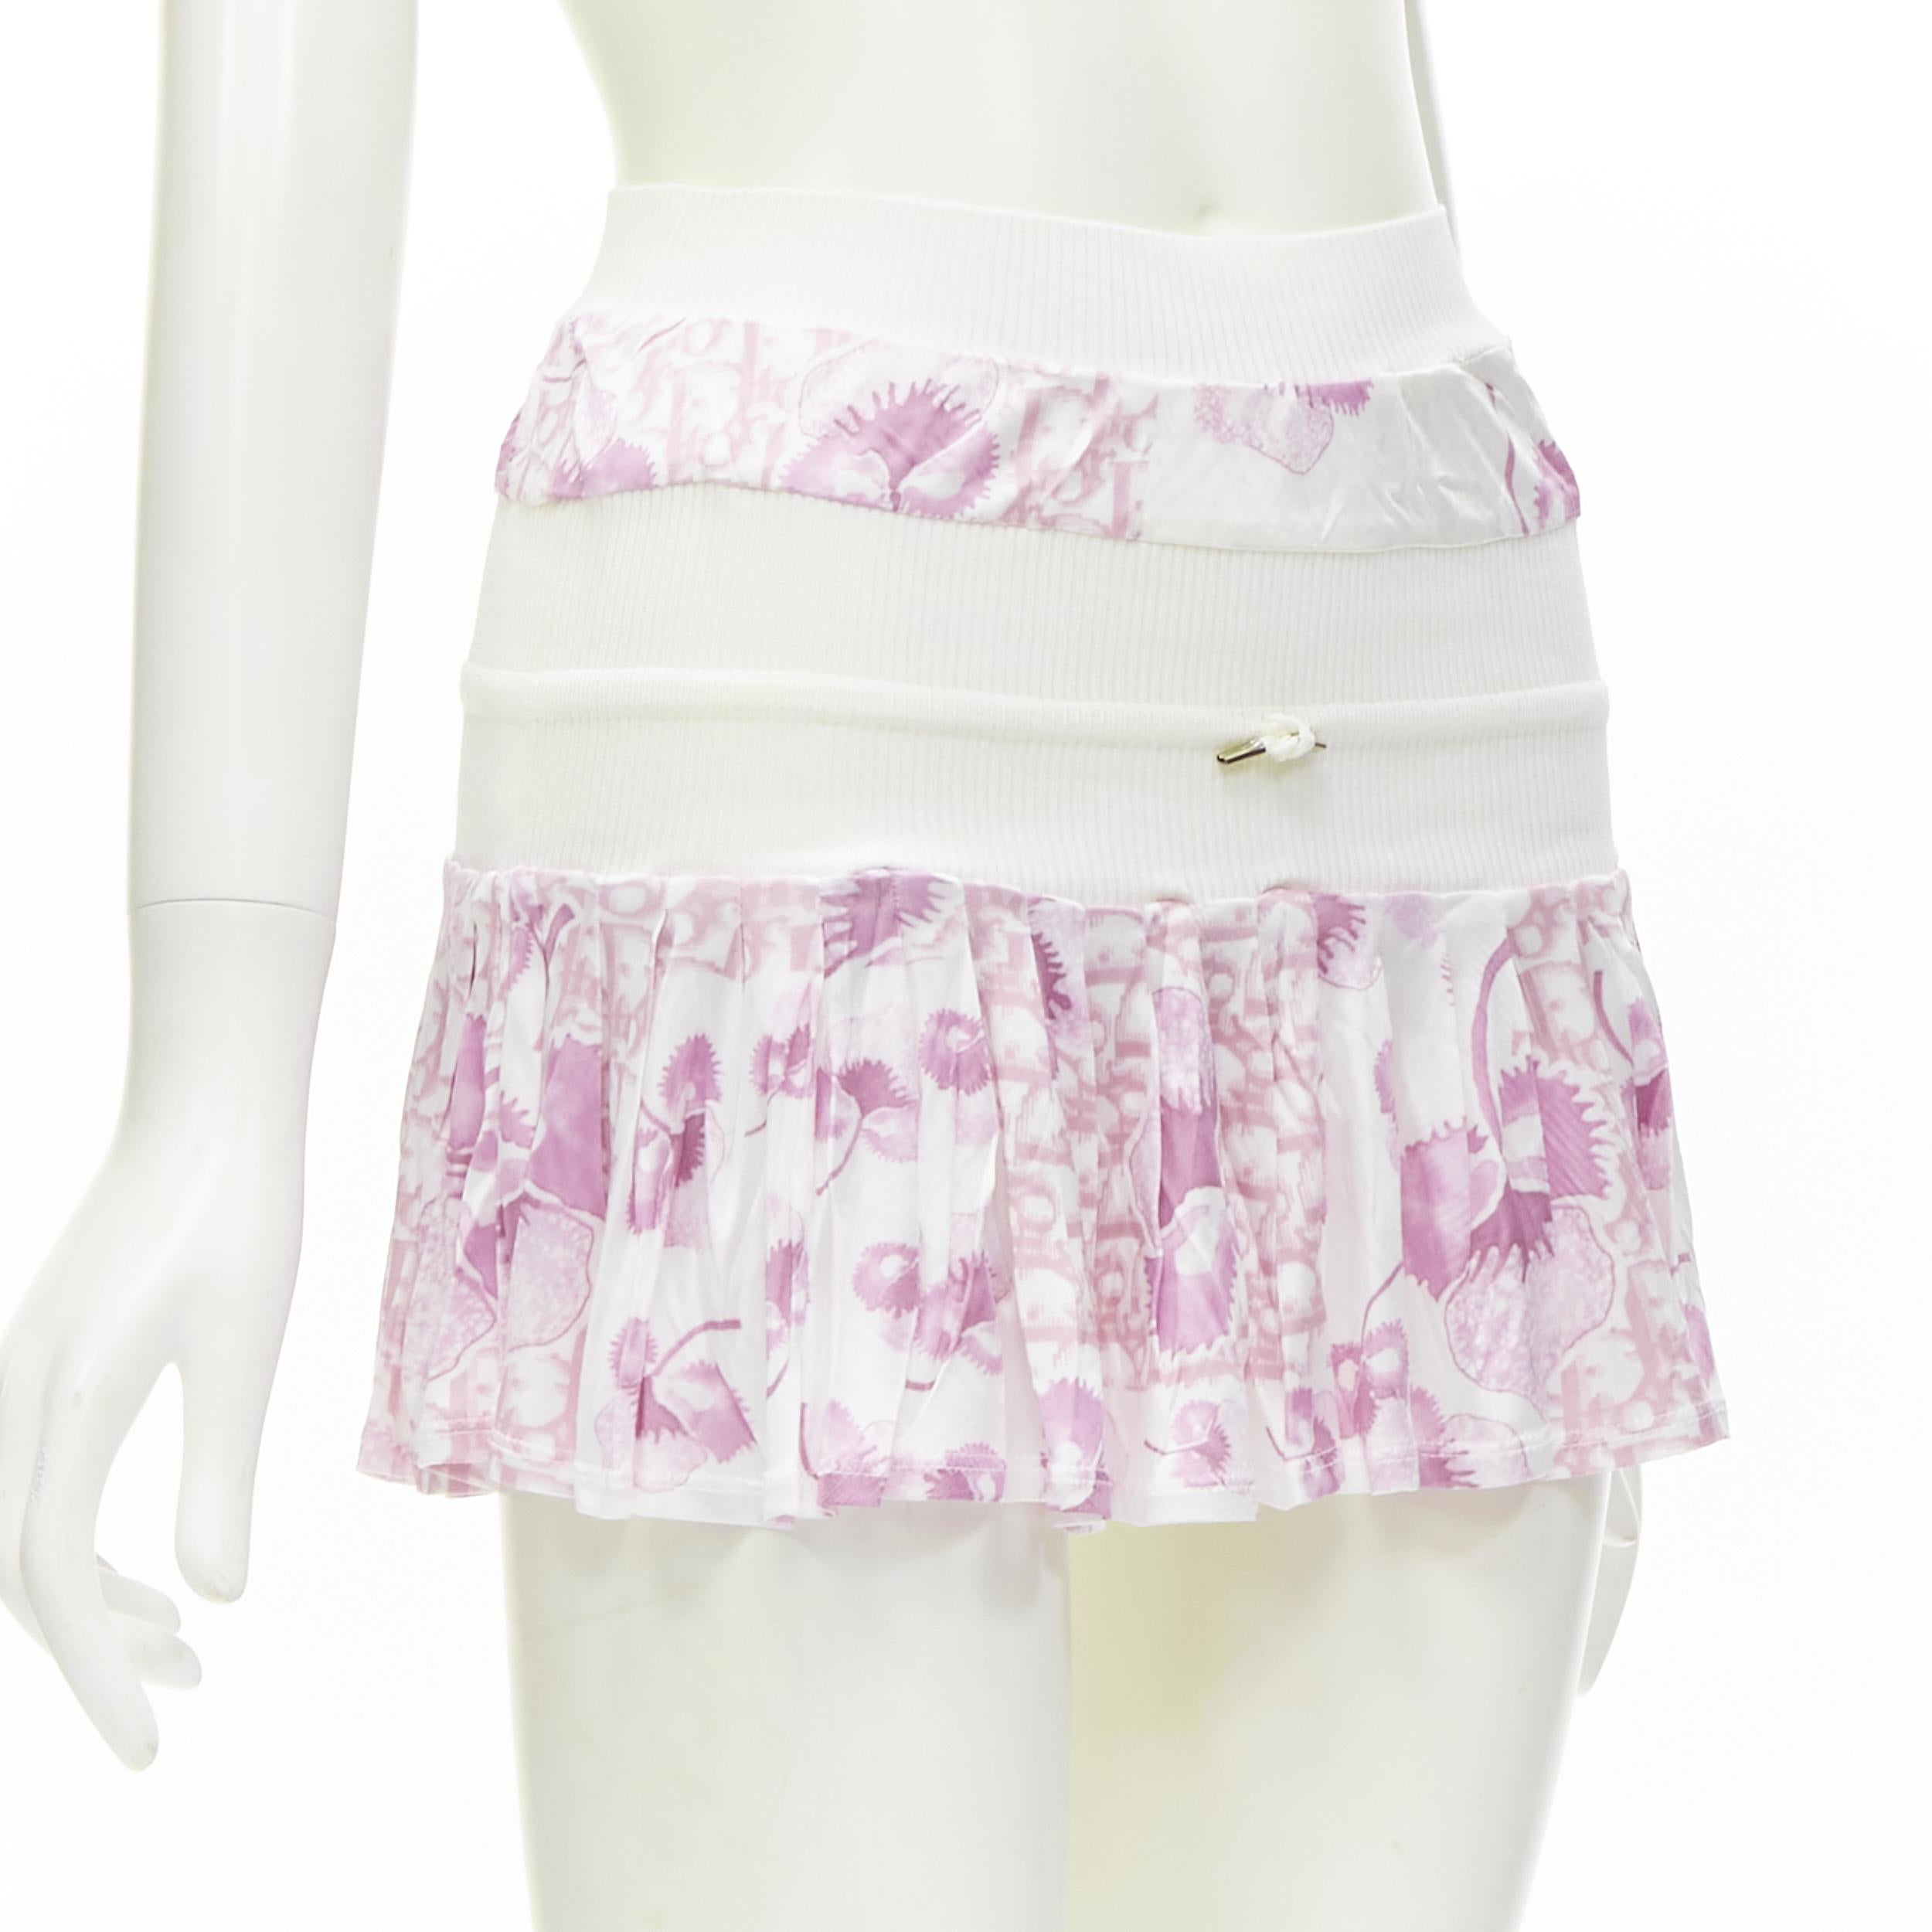 rare CHRISTIAN DIOR Galliano Y2K pink Cherry Blossom Oblique monogram skirt XS 
Reference: ANWU/A00523 
Brand: Christian DIor 
Designer: John Galliano 
Collection: Cherry Blossom 2005 
Material: Feels like jersey 
Color: Pink 
Pattern: Floral